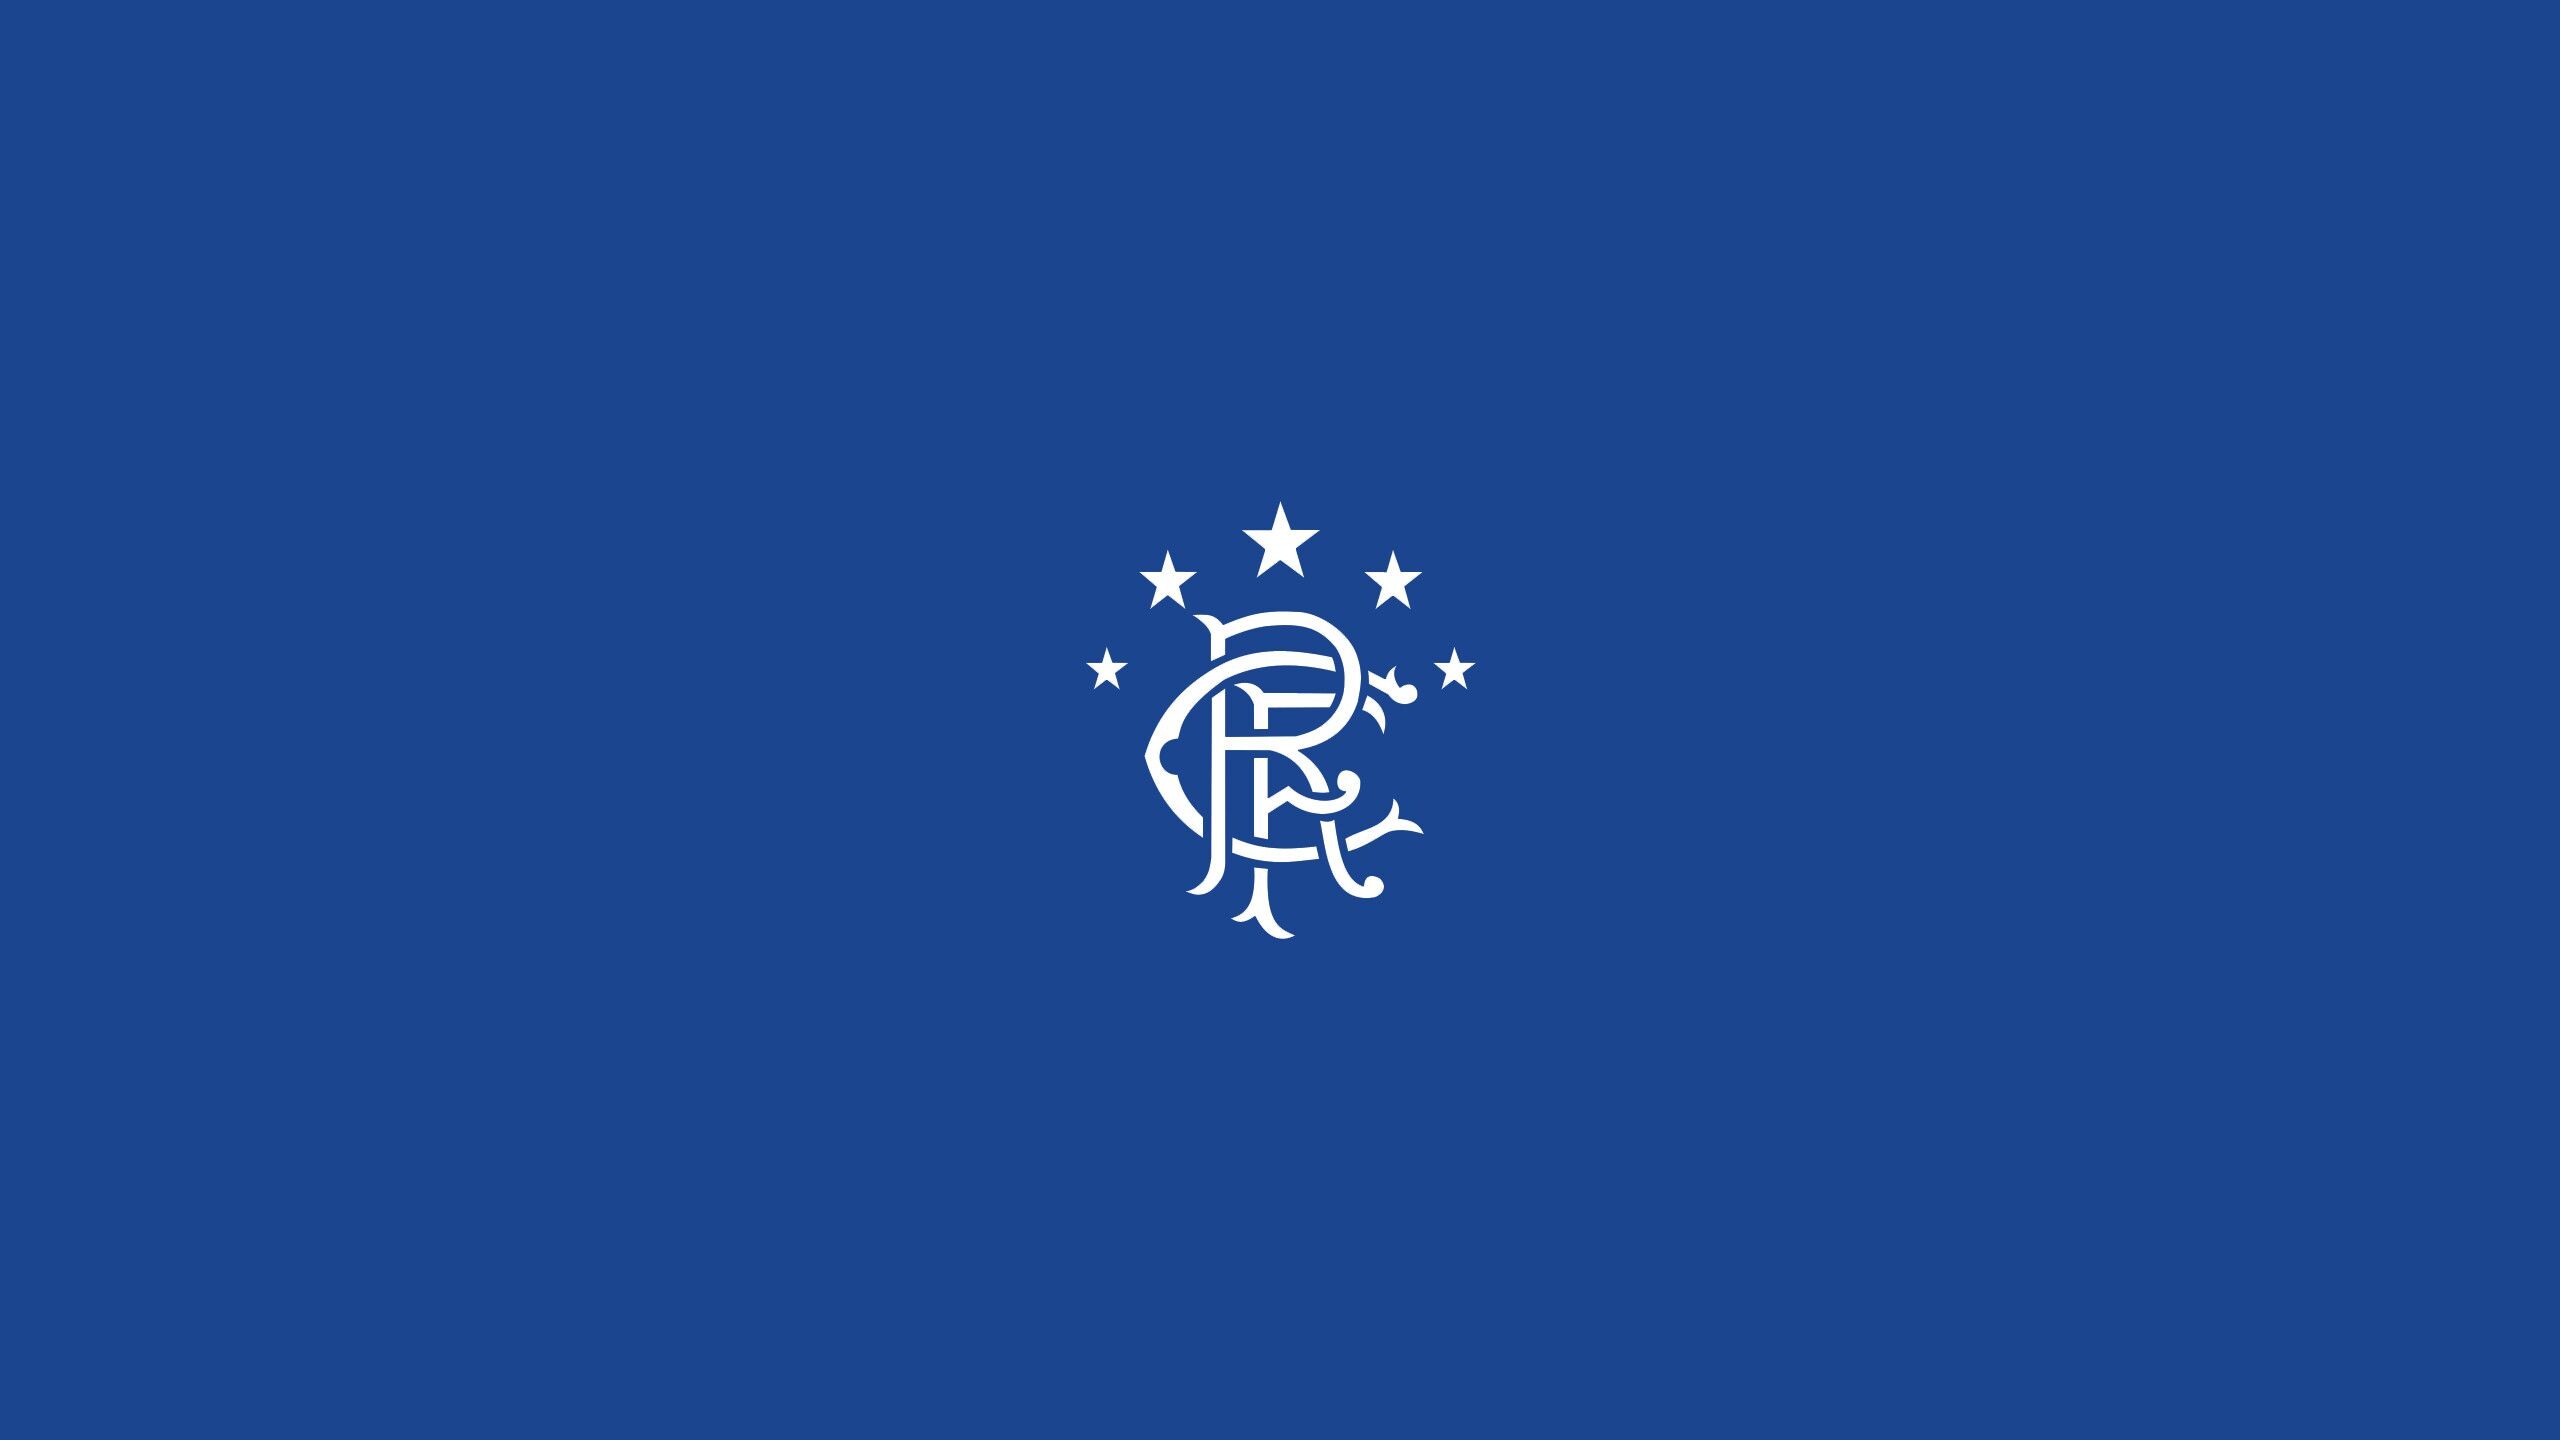 Rangers F.C.: Scottish professional football club from Glasgow, founded in 1872. 2560x1440 HD Background.